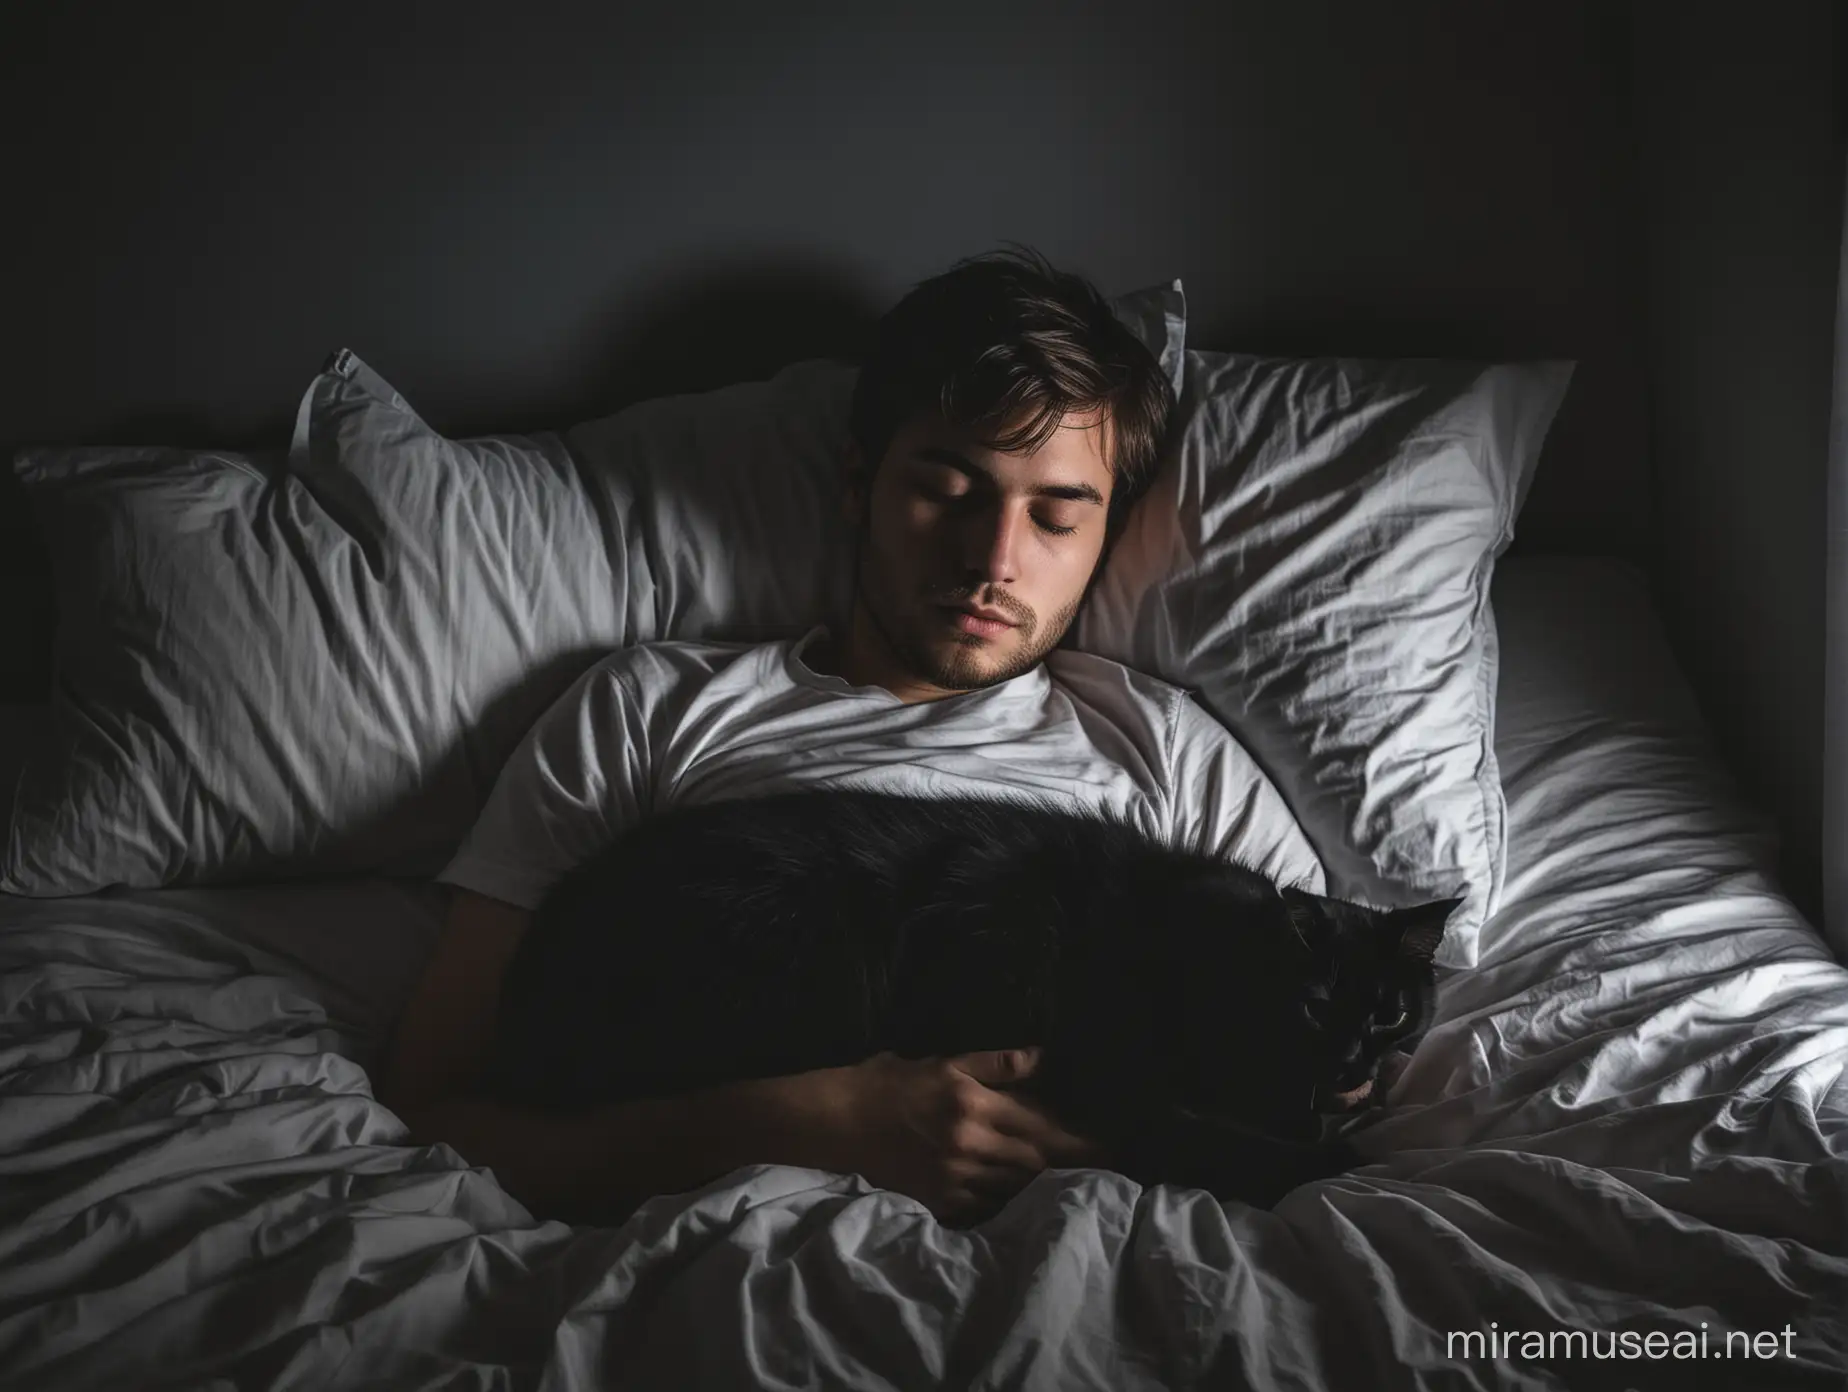 Young Adult Man Sleeping with Black Cat in Dark Room at Night